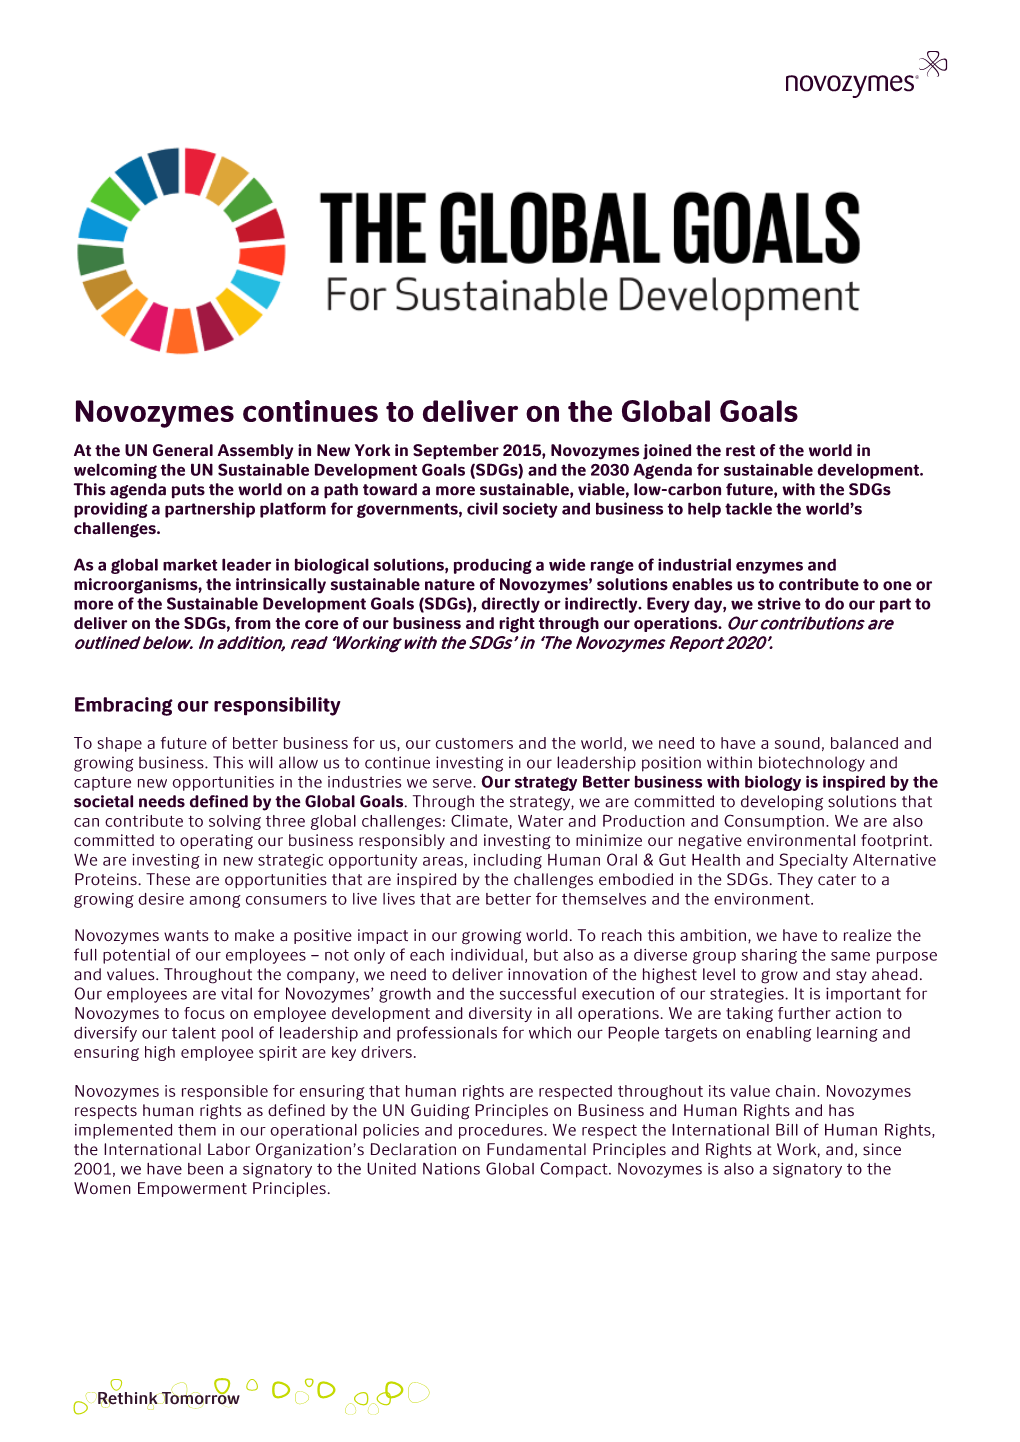 Novozymes Continues to Deliver on the Global Goals